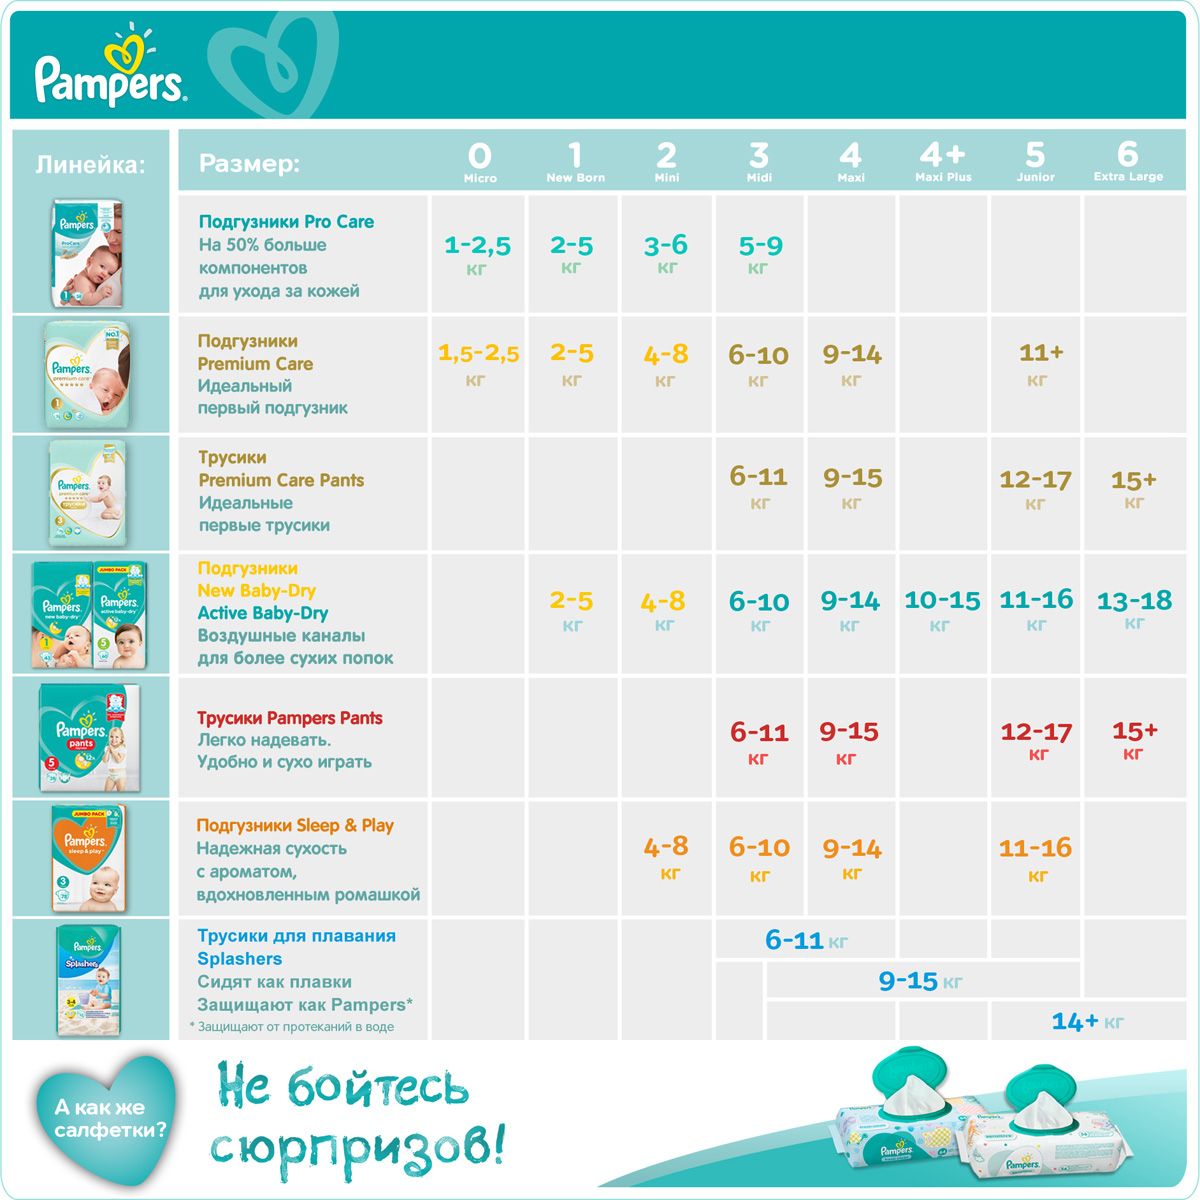 Pampers  Pants 12-17  ( 5) 152 